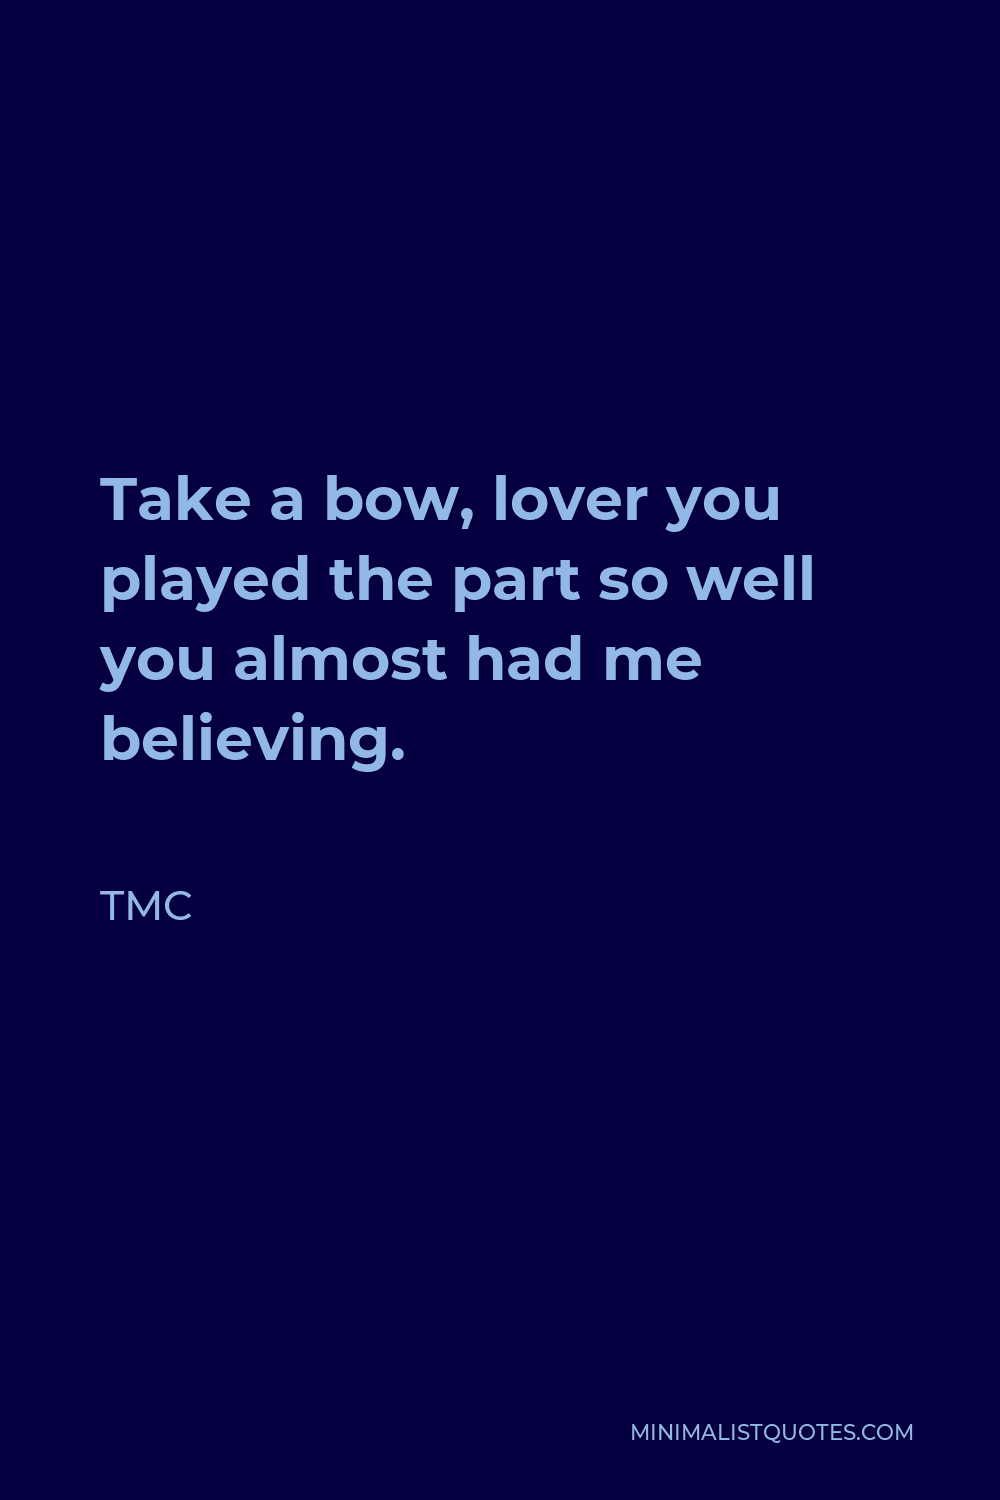 TMC Quote - Take a bow, lover you played the part so well you almost had me believing.